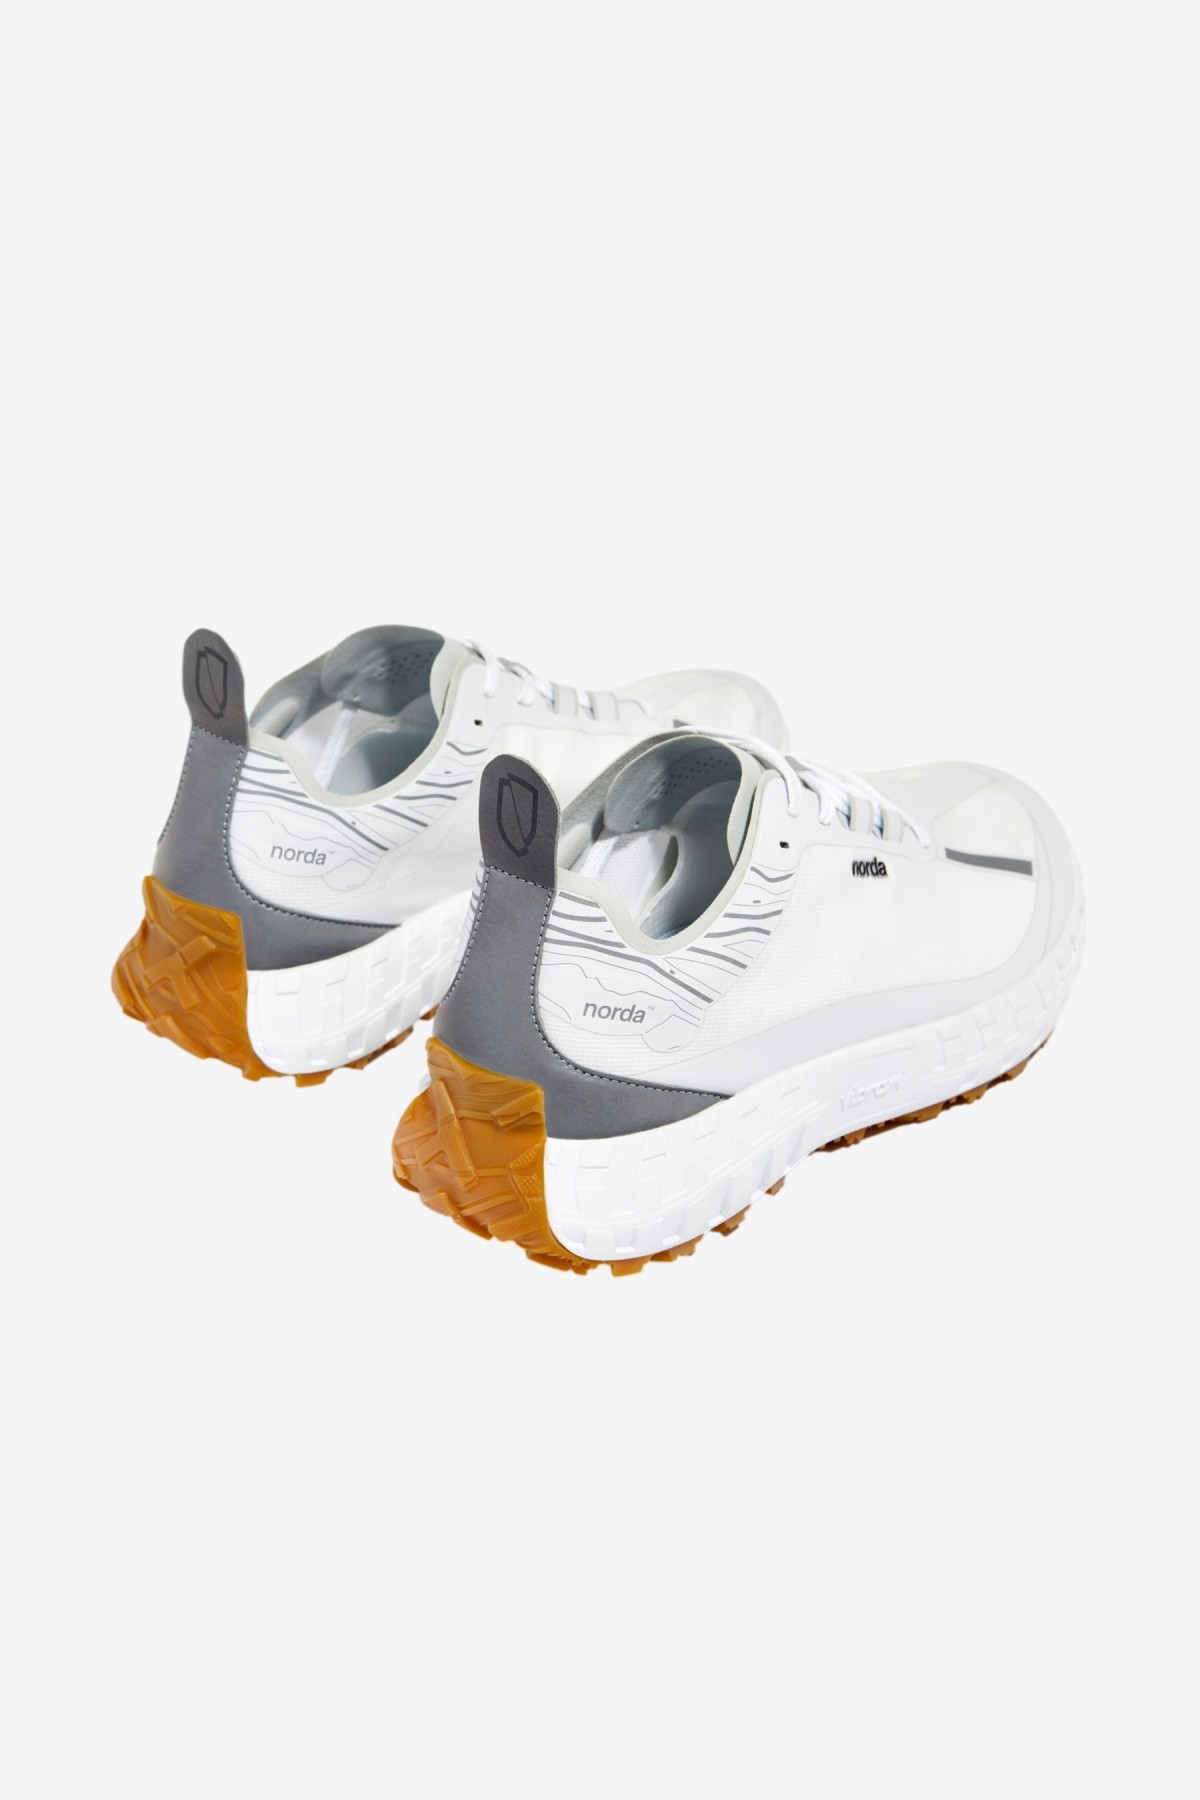 Norda 001 Trail Shoes in White/Gum